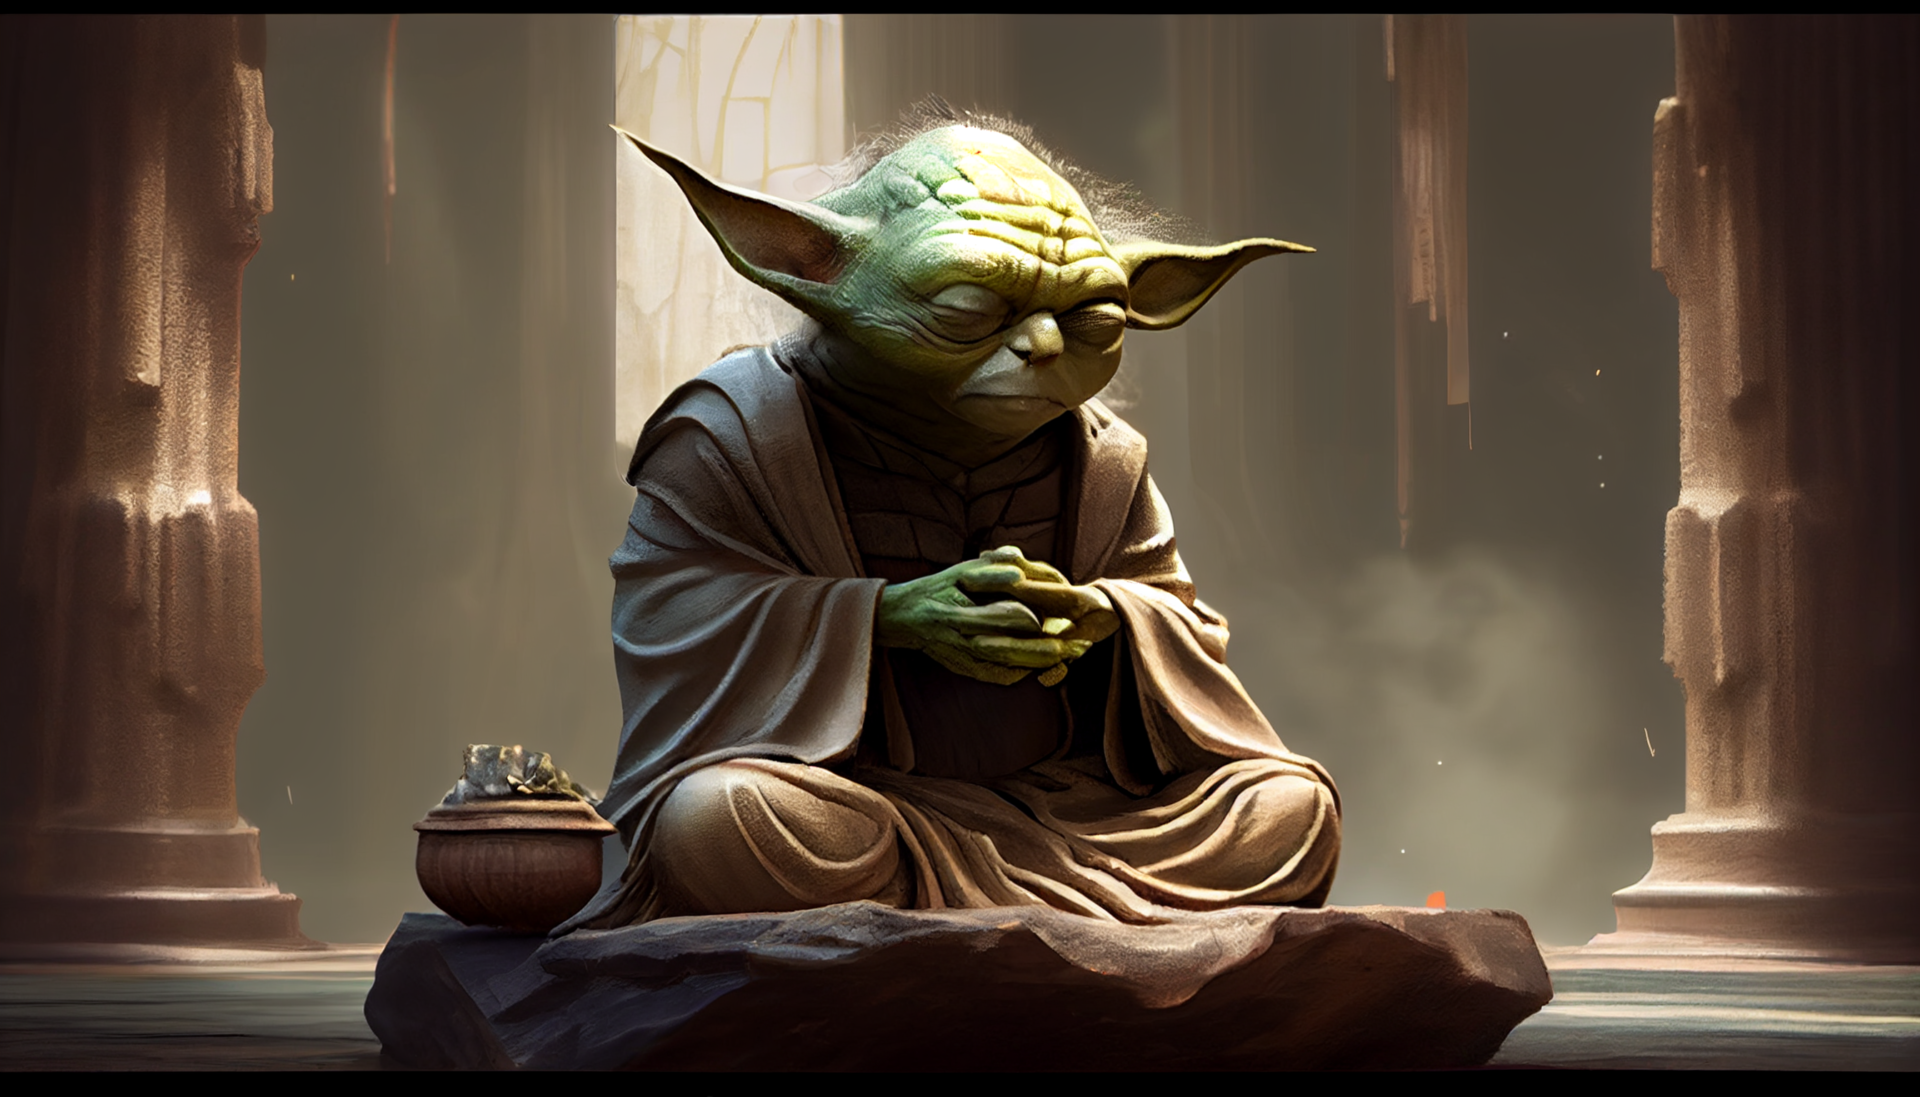 Get Inspired by the Wisdom of Yoda with These Star Wars Wallpapers